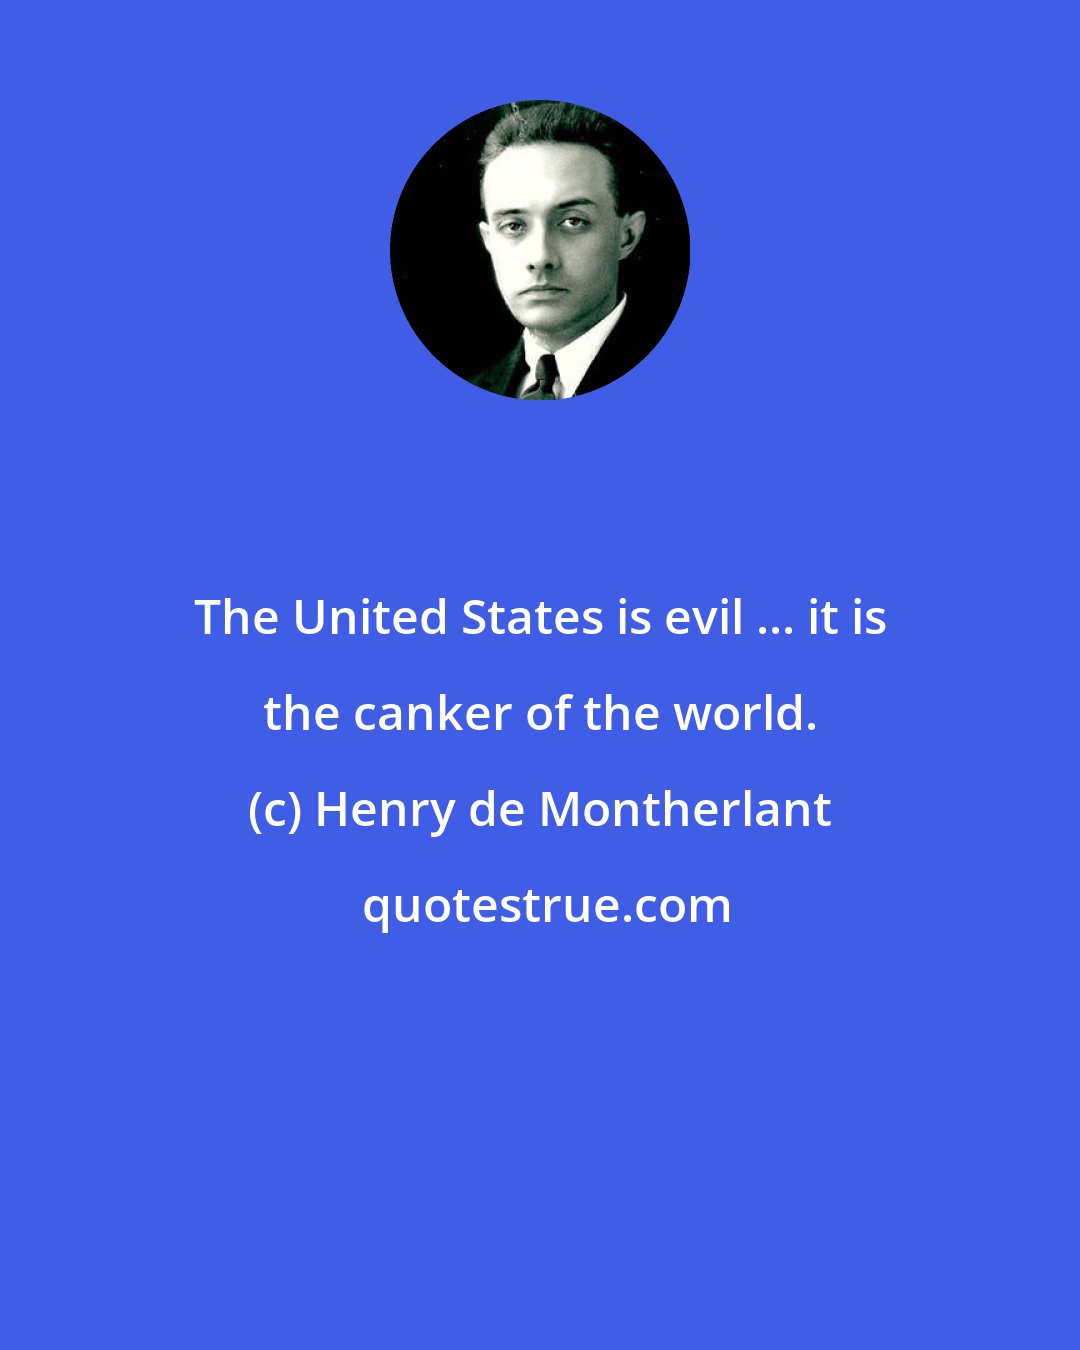 Henry de Montherlant: The United States is evil ... it is the canker of the world.